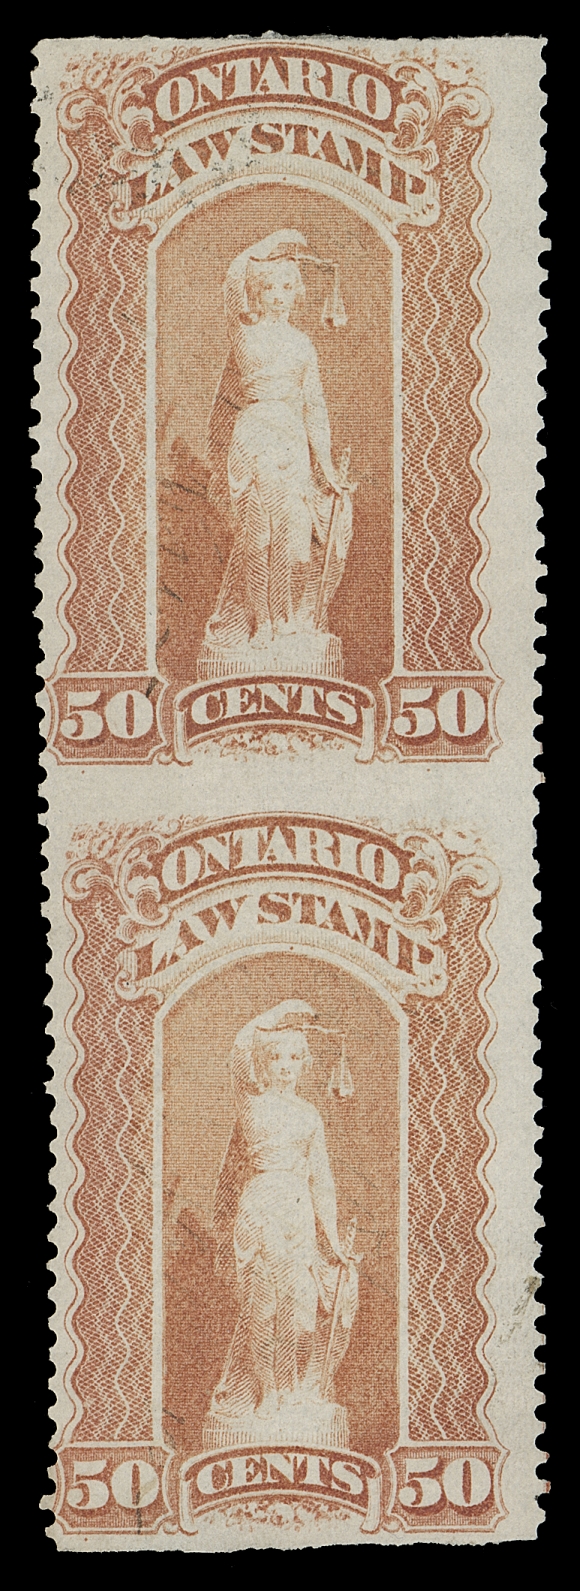 CANADA REVENUES (PROVINCIAL)  OL52a,A used vertical pair imperforate horizontally, very lightly cancelled and quite rare, Fine+